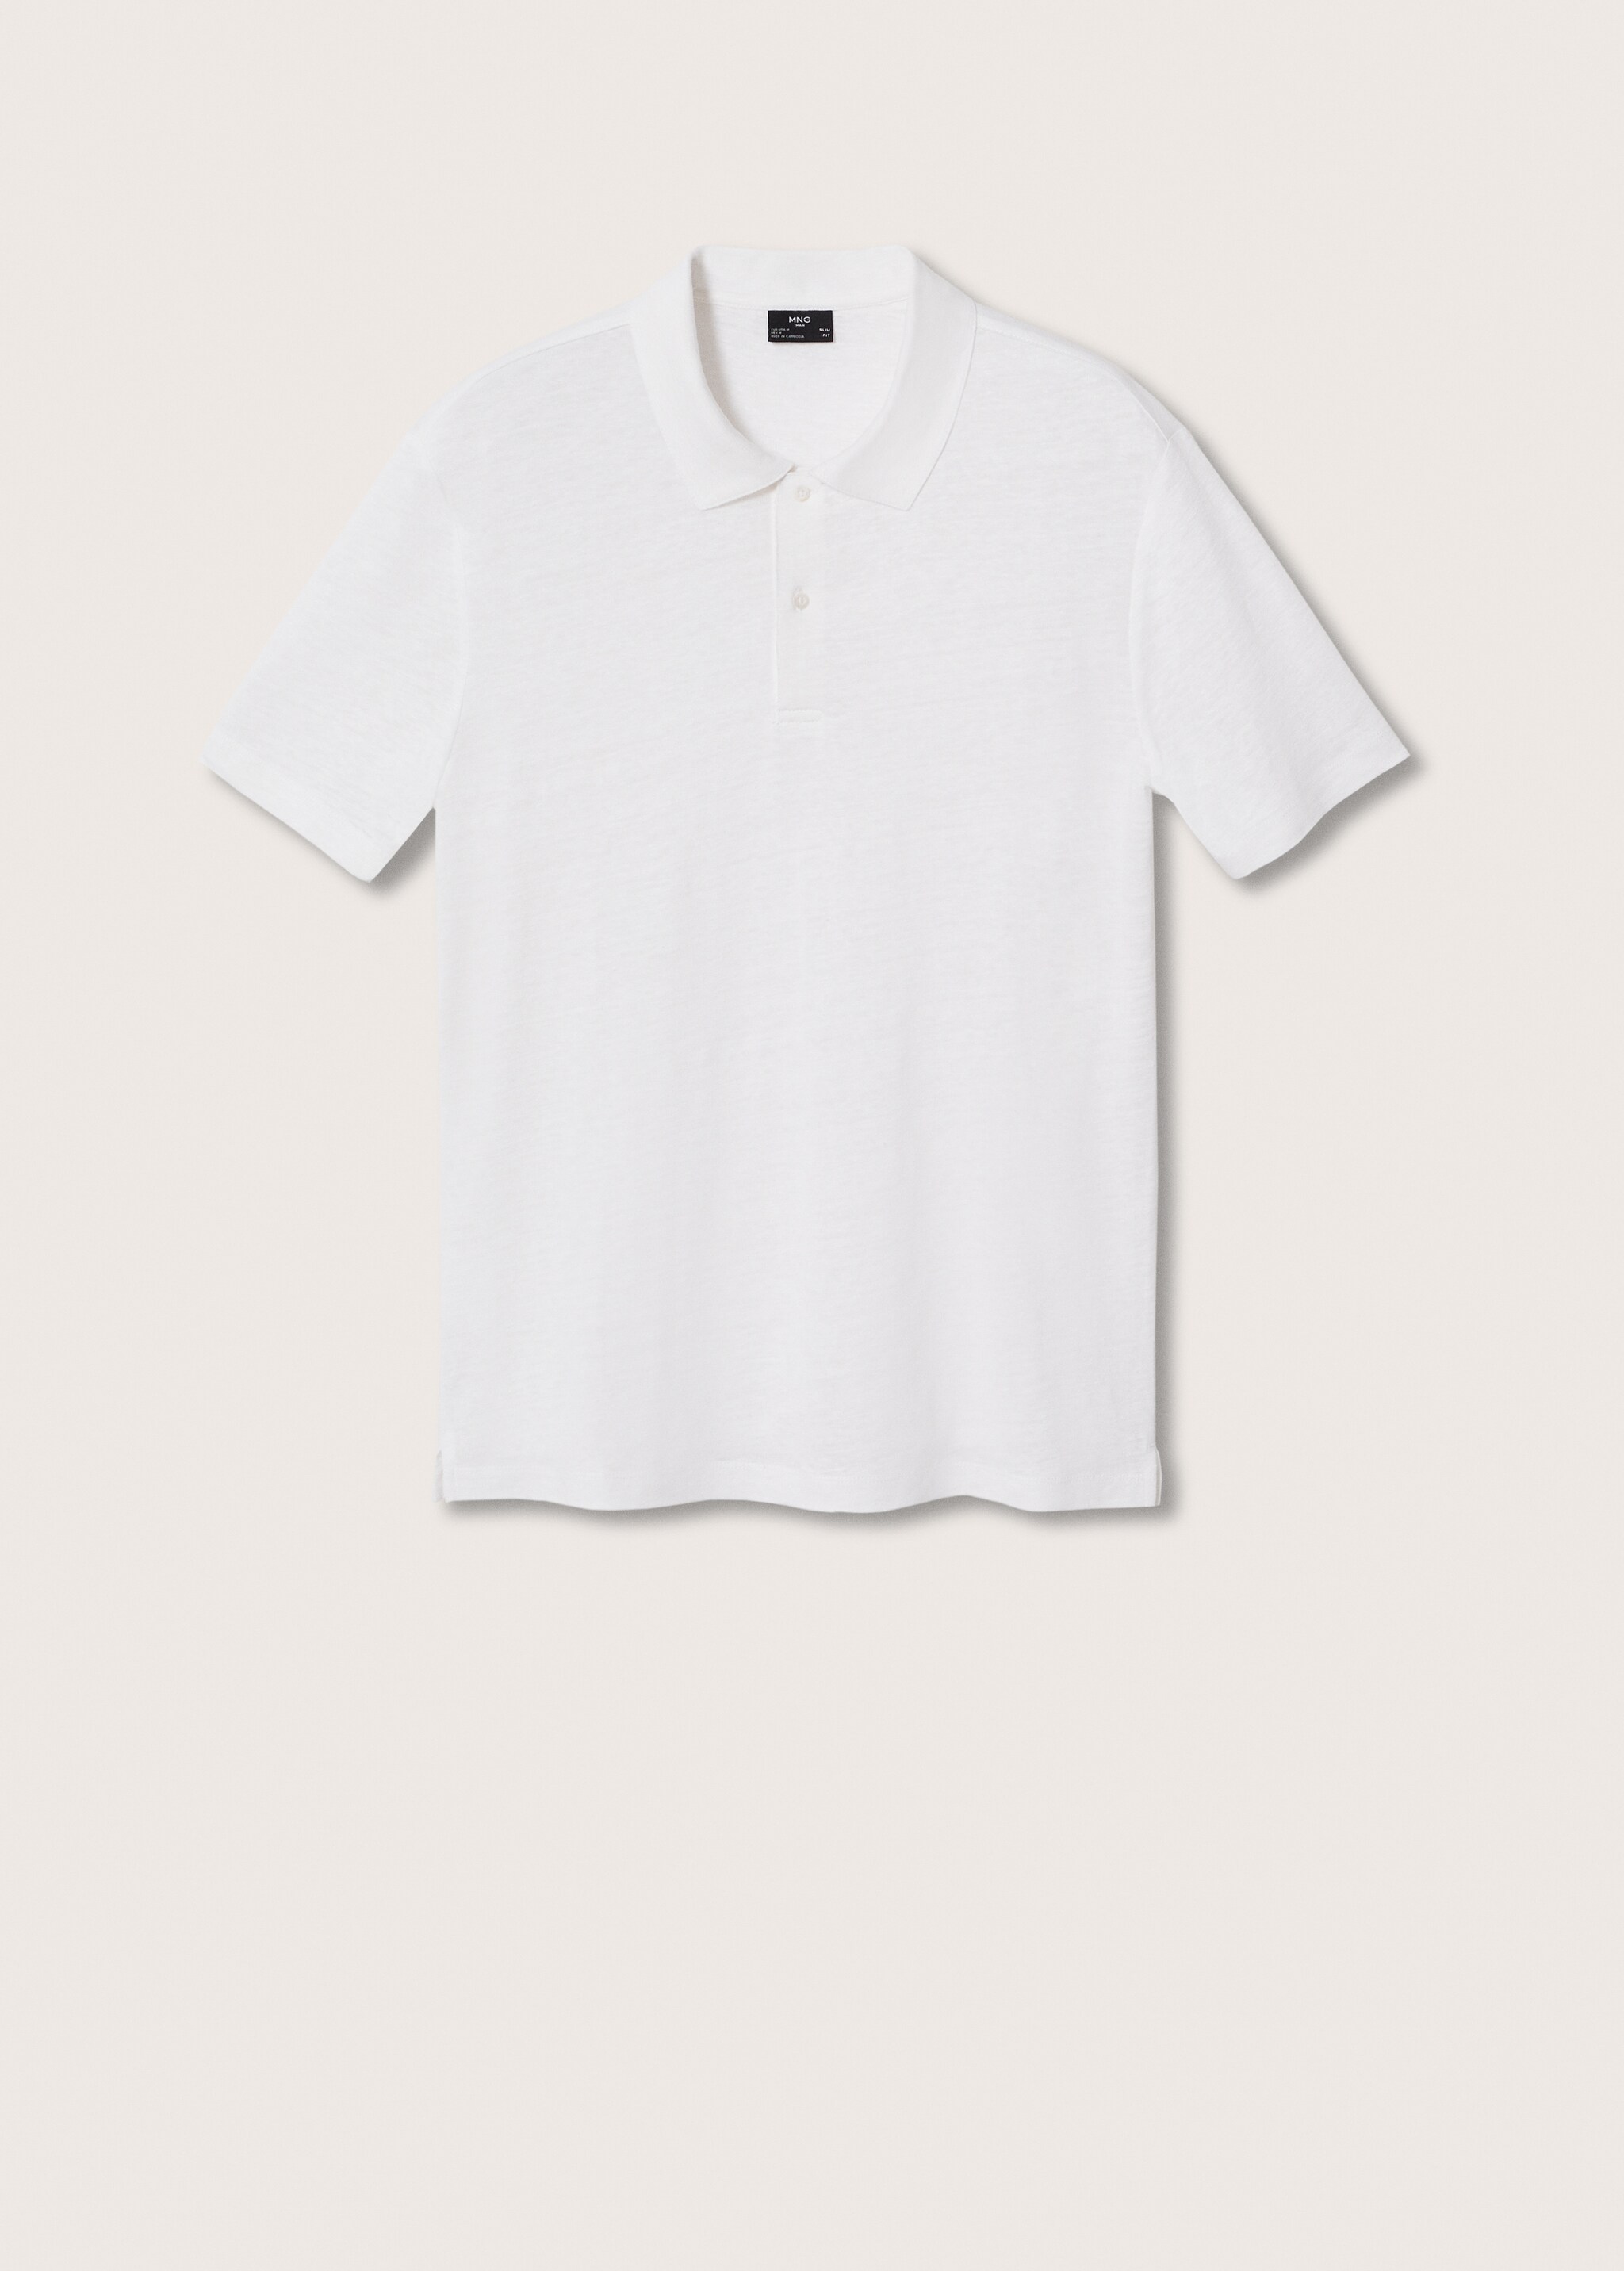 100% linen polo shirt - Article without model